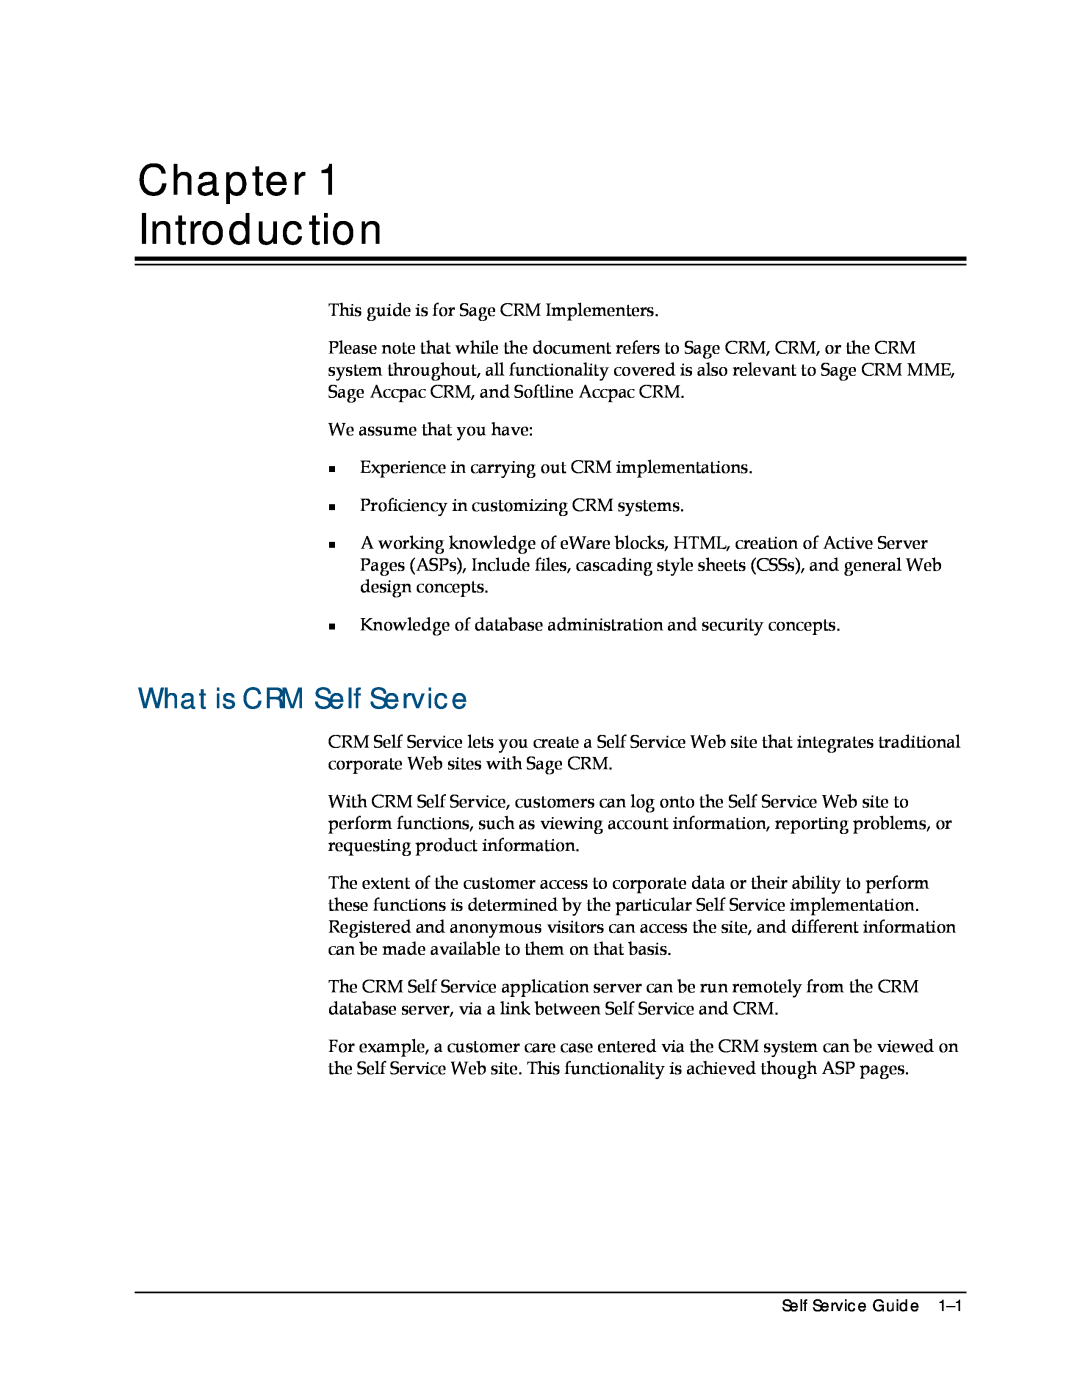 Sage Software 5.8 manual Chapter Introduction, What is CRM Self Service 